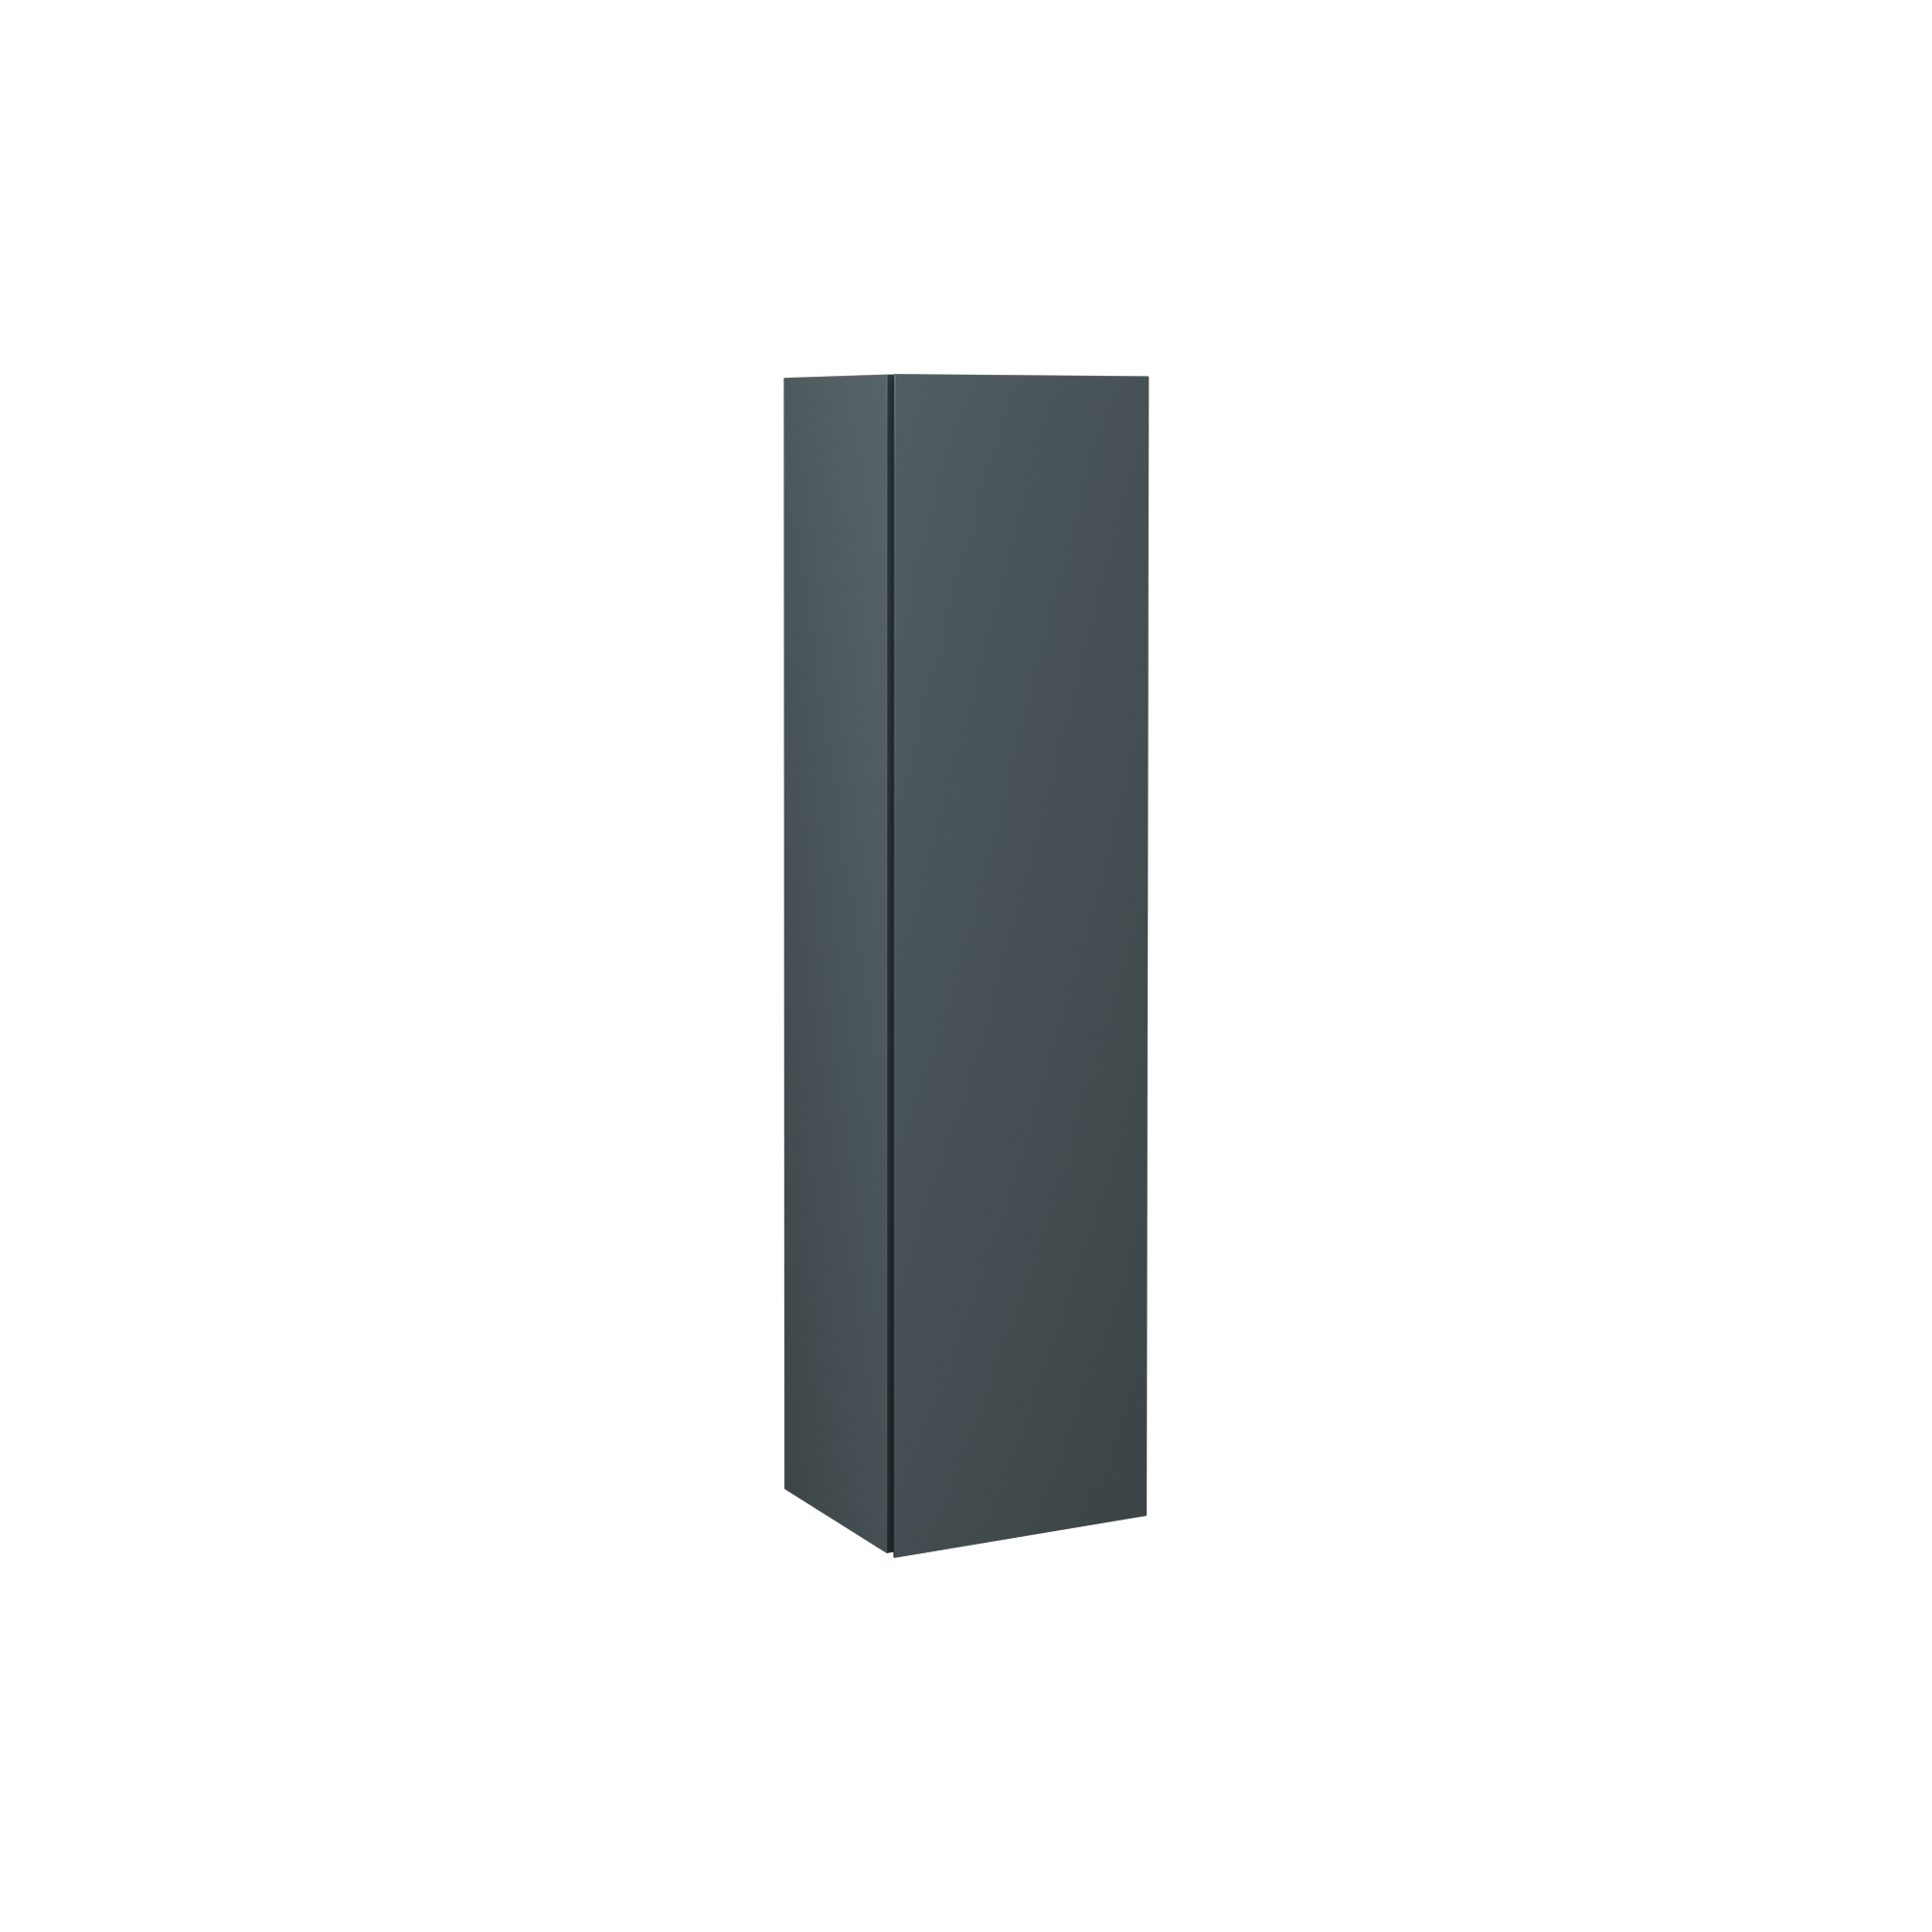 Pro 14" Tall Cabinet, Anthracite Left